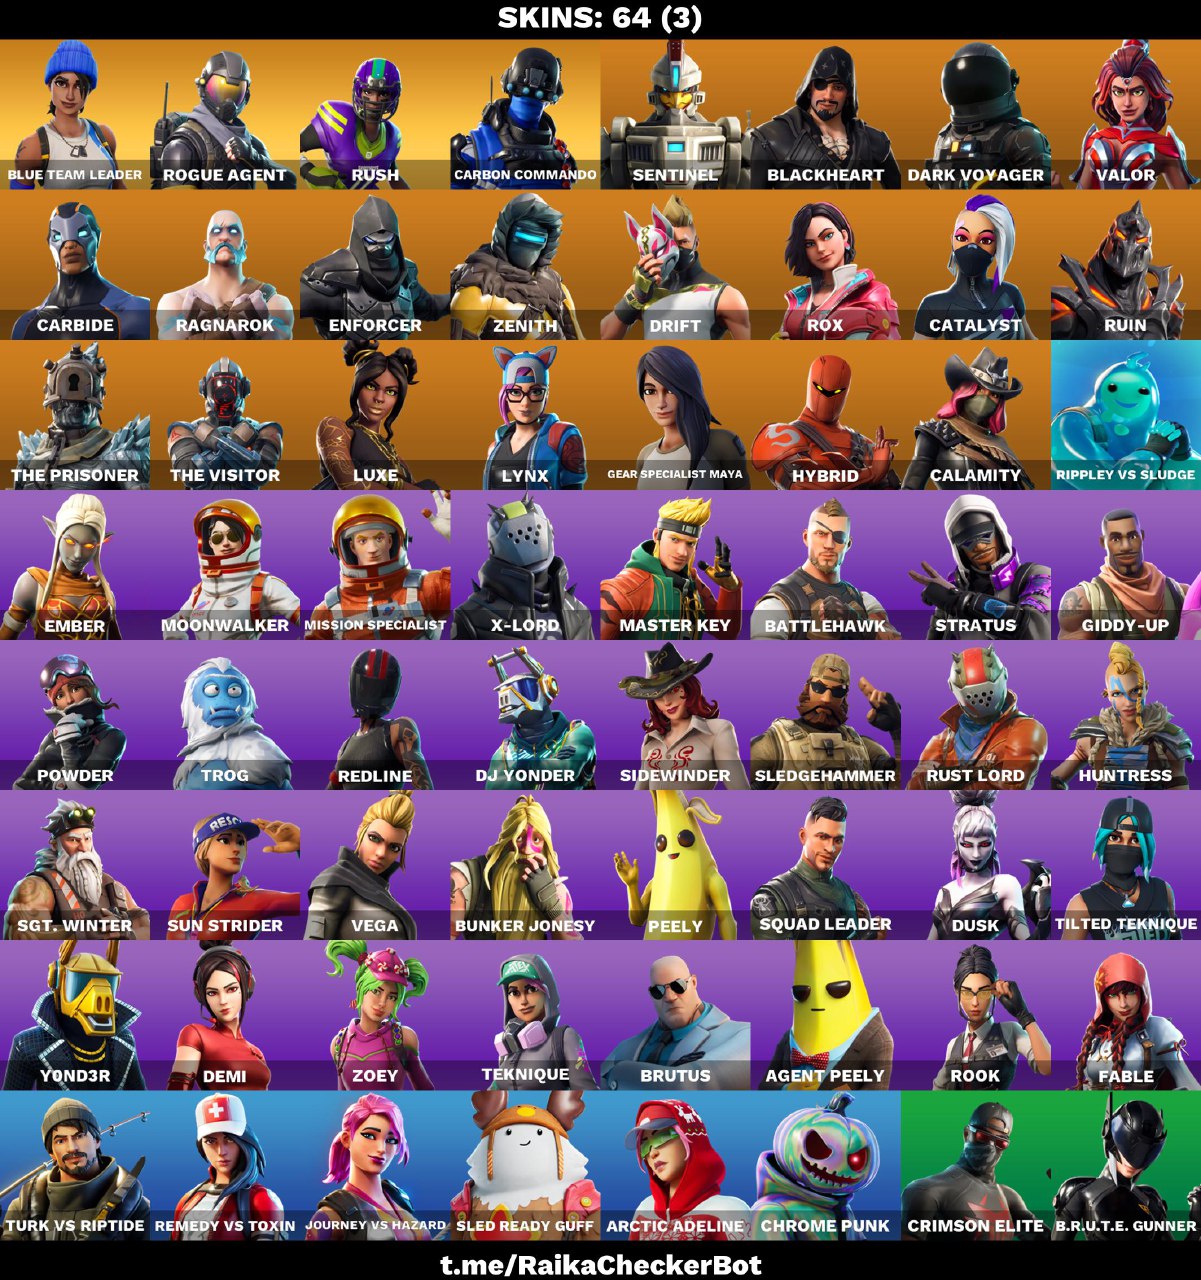 FA | 64 OUTFITS | BLUE TEAM LEADER | ROGUE AGENT | RUSH | CARBON COMMANDO | CARBON PACK | TAKE THE L | TAKE THE ELF | ORANGE JUSTICE